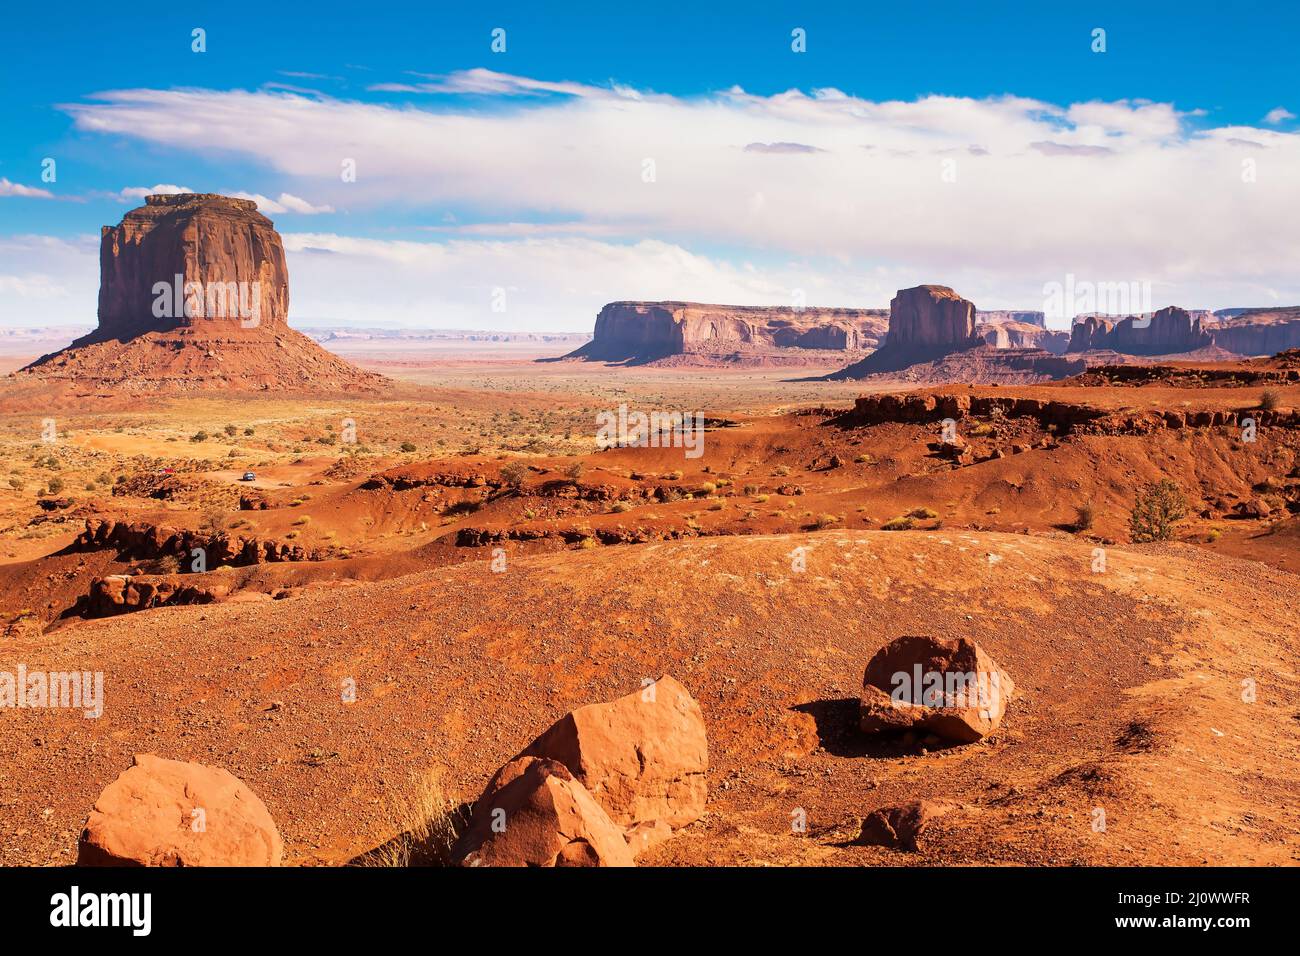 The Indian Navajo Reservation Stock Photo